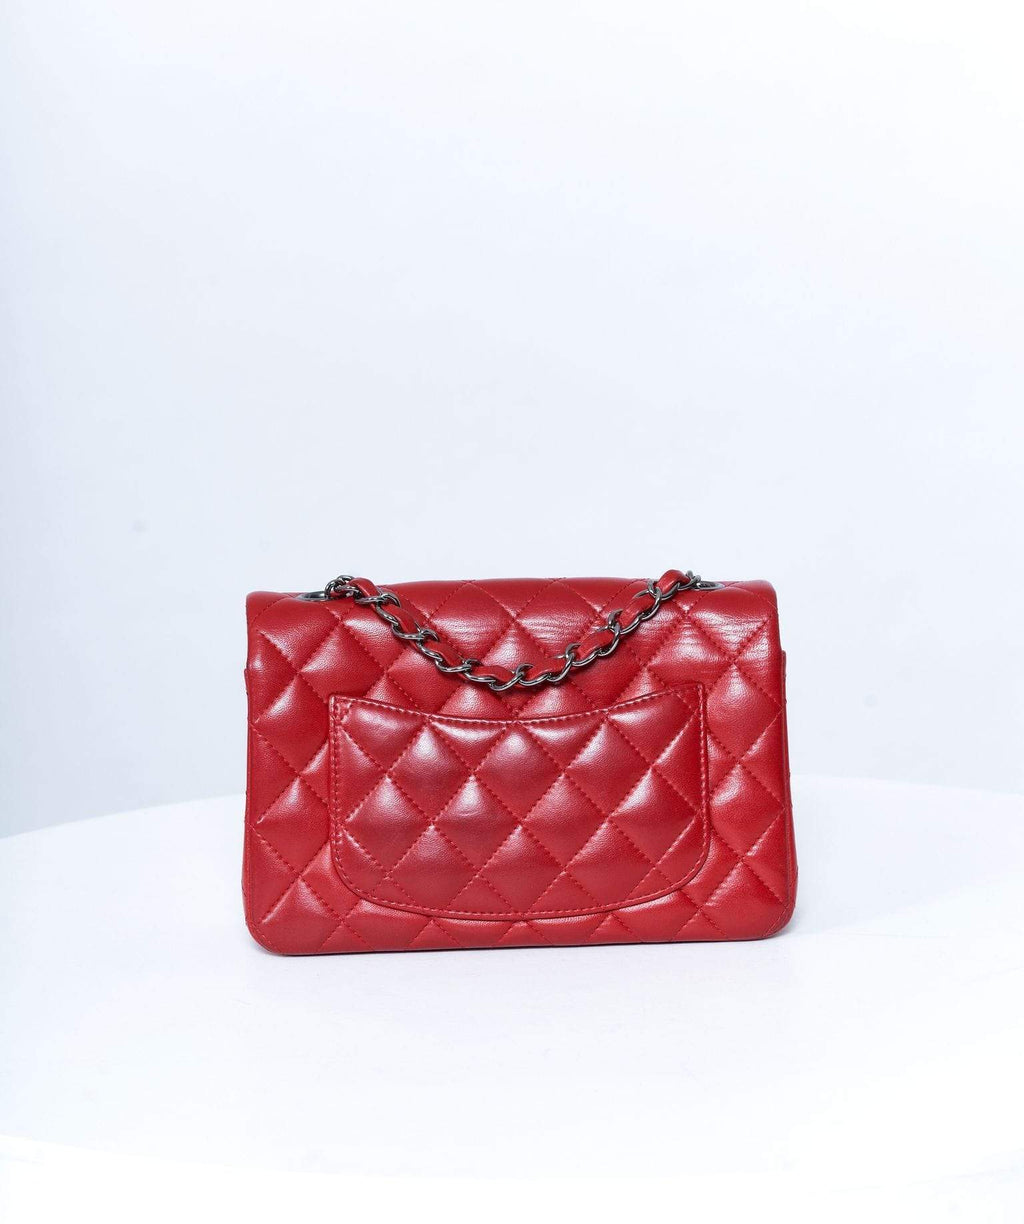 Chanel Red Lambskin Bag - 148 For Sale on 1stDibs